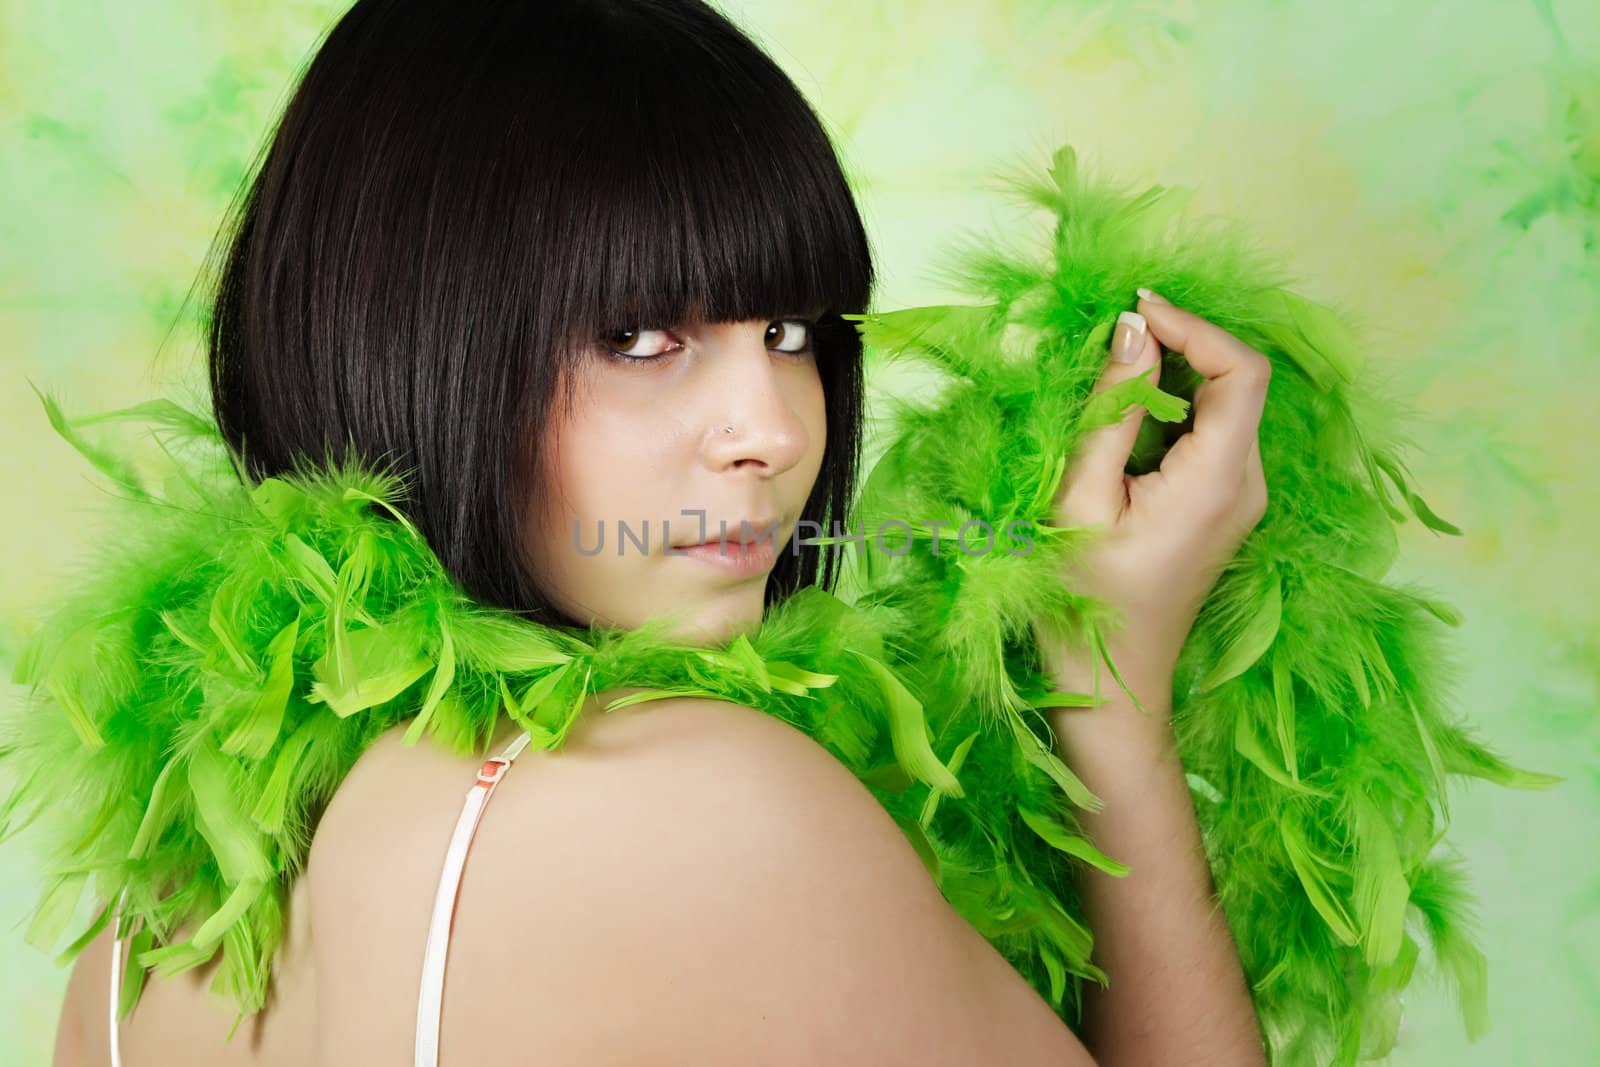 girl with green feather boa by lanalanglois